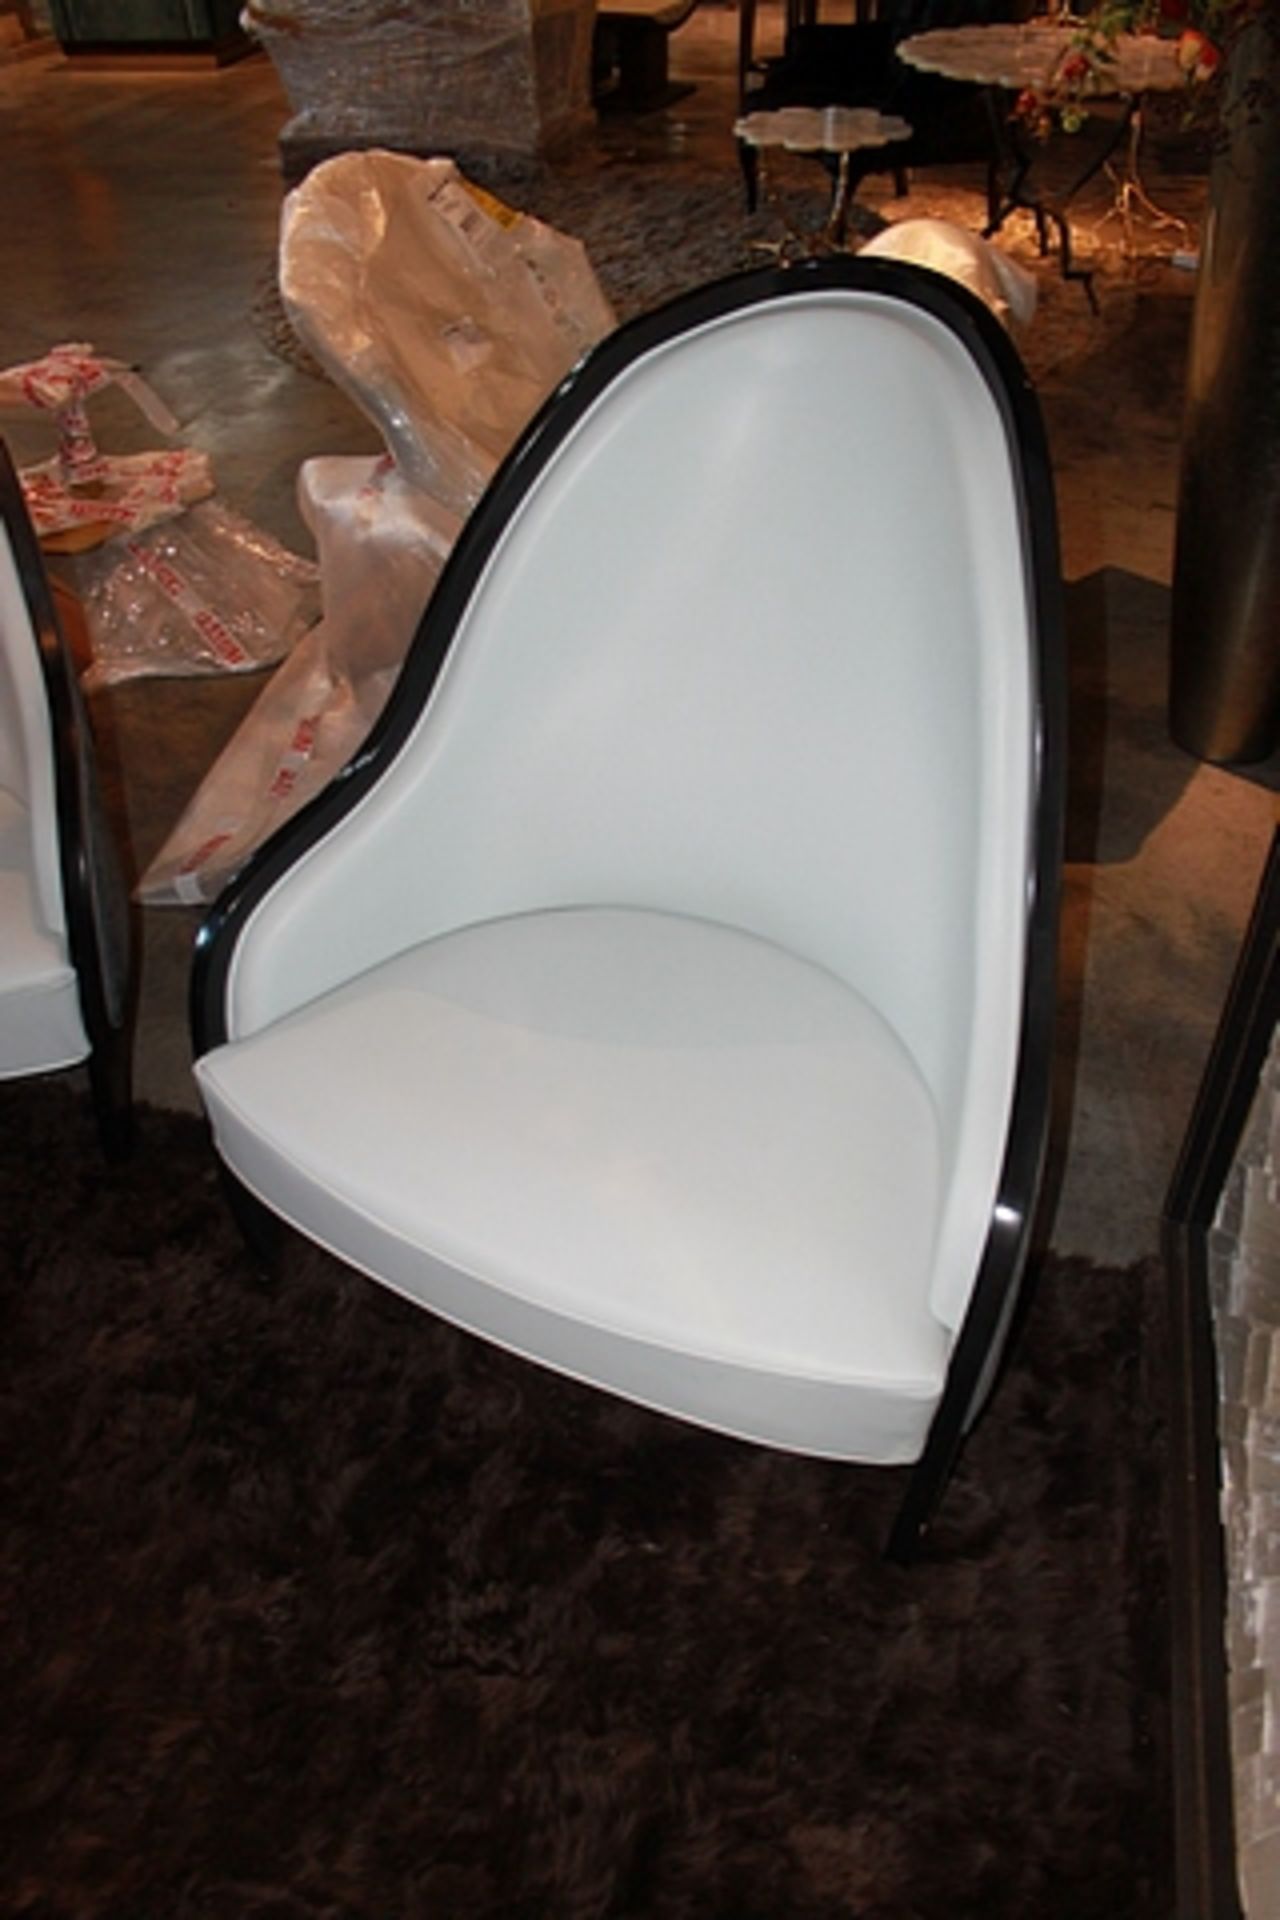 Armchair Ave beautifully crafted generously proportioned with sweeping curves the armchair is